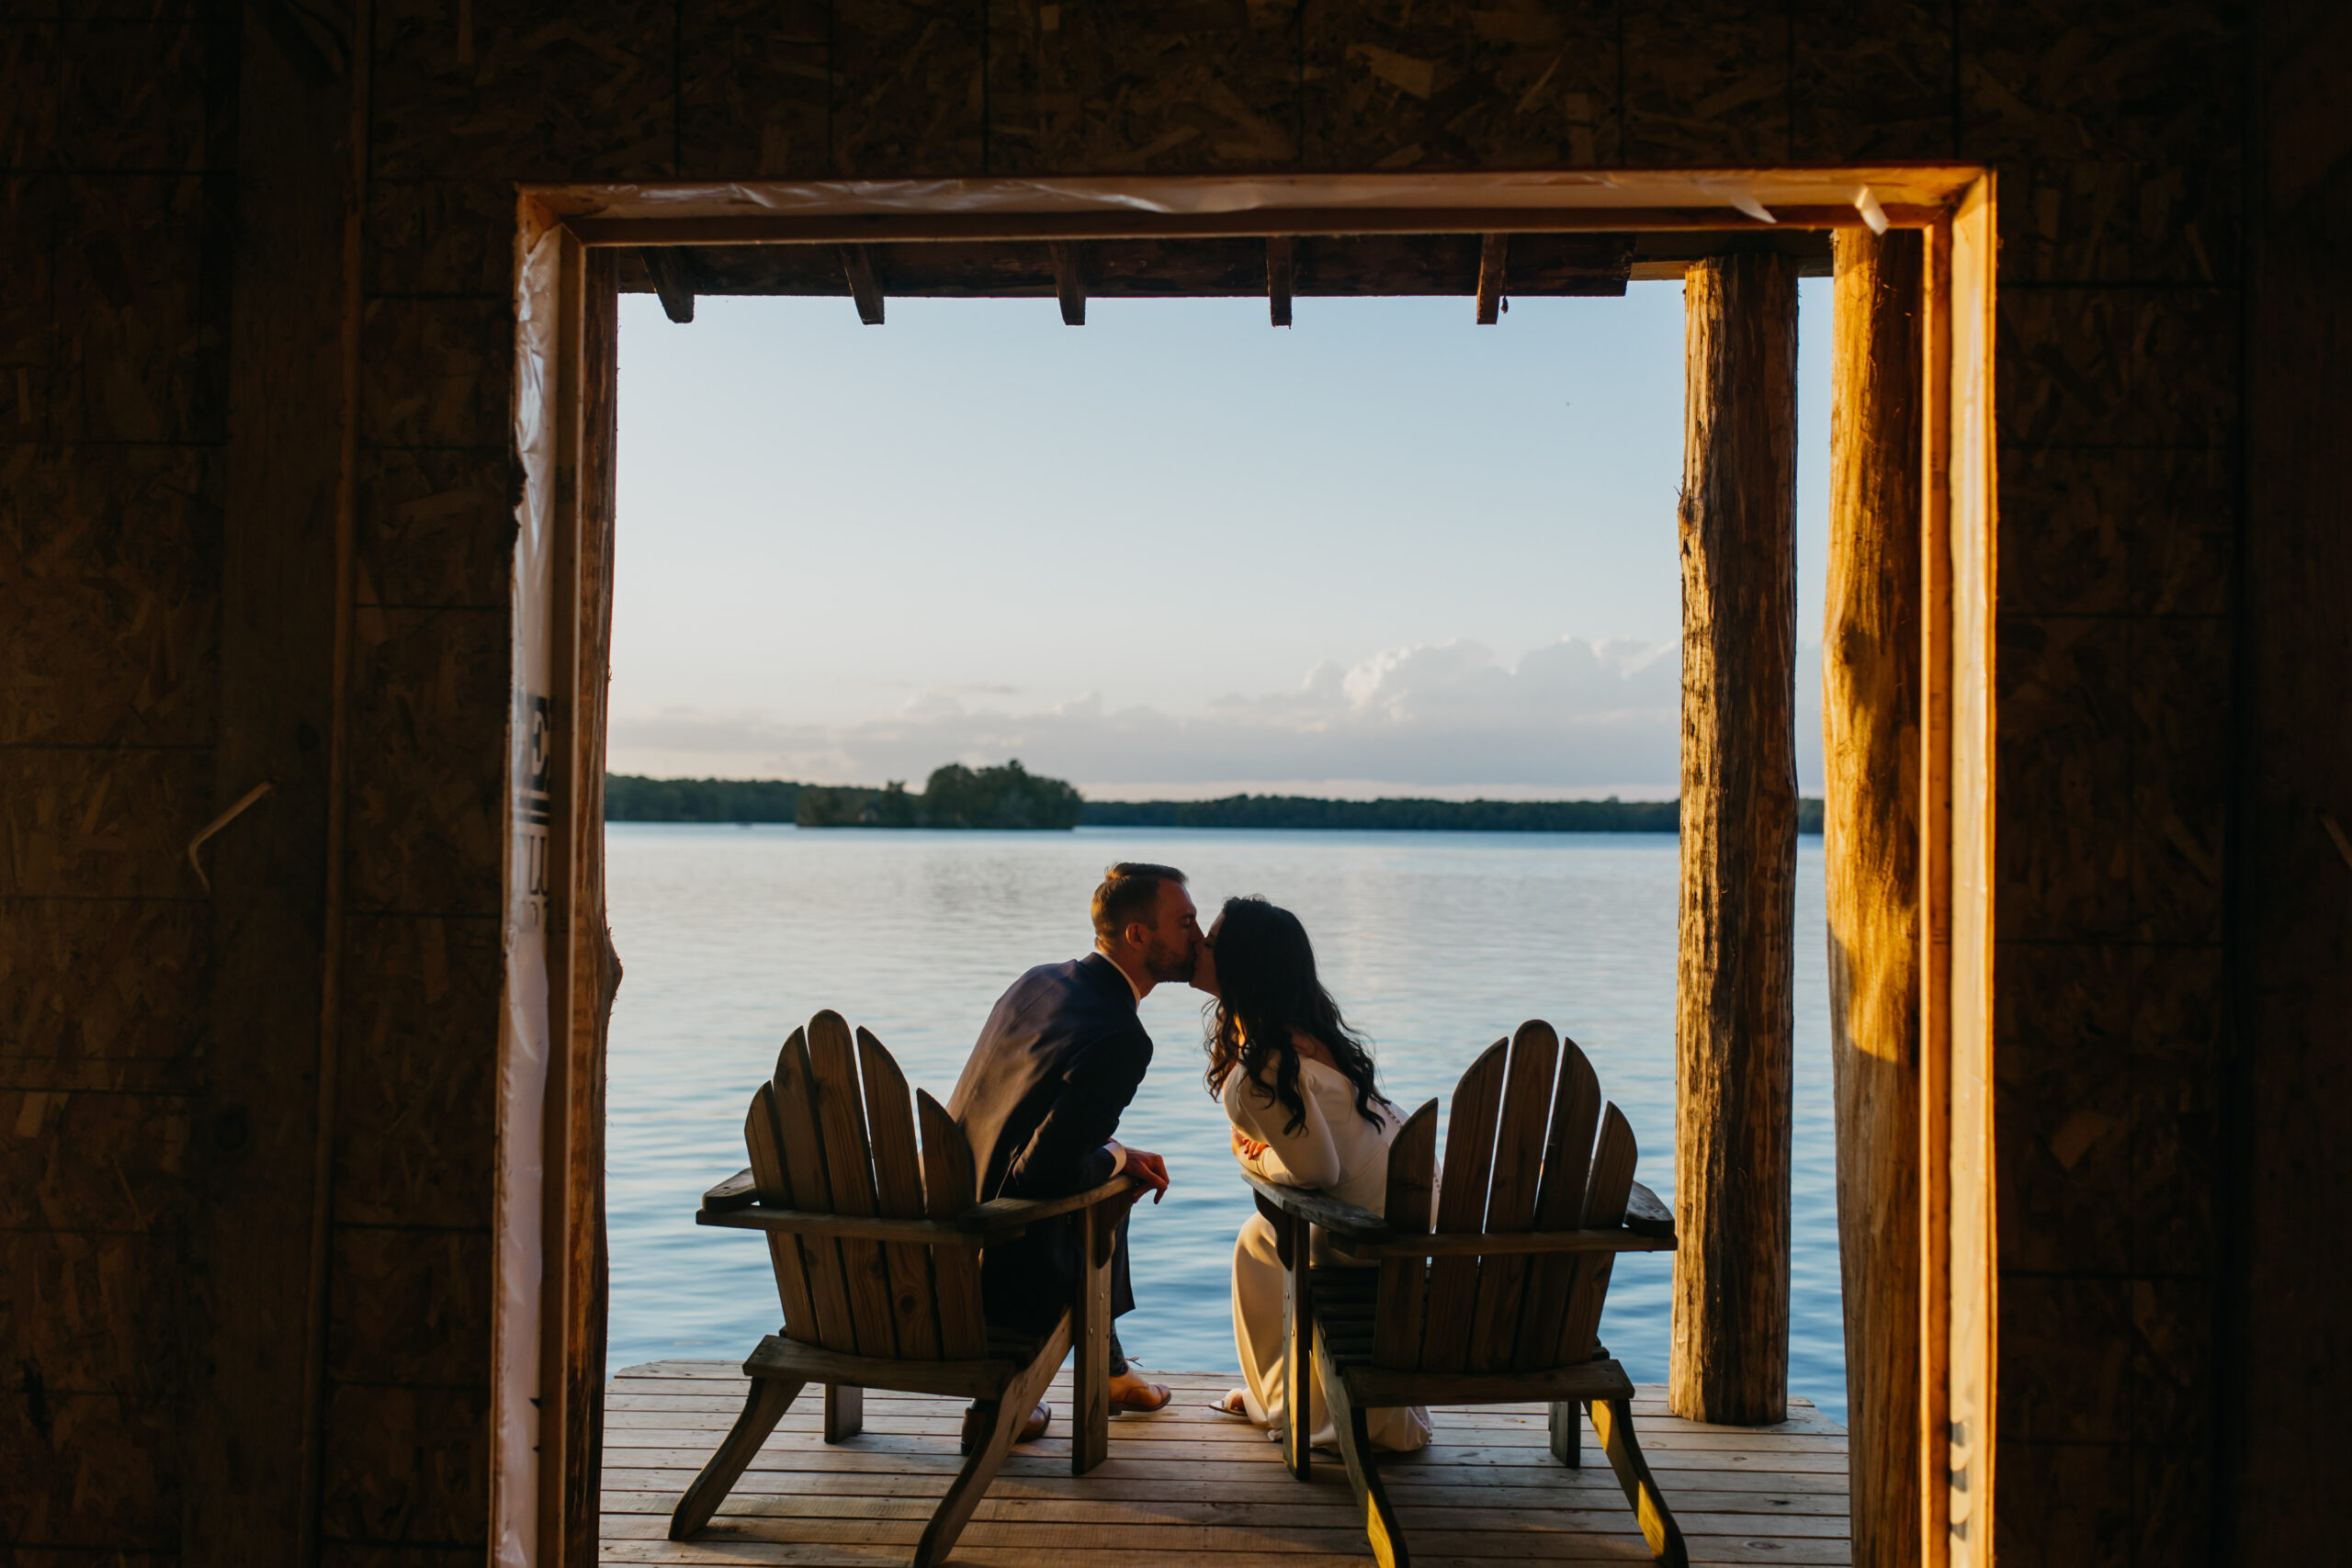 A photo of the lovely bride and groom kissing at The Stout's Island lodge during their wedding day